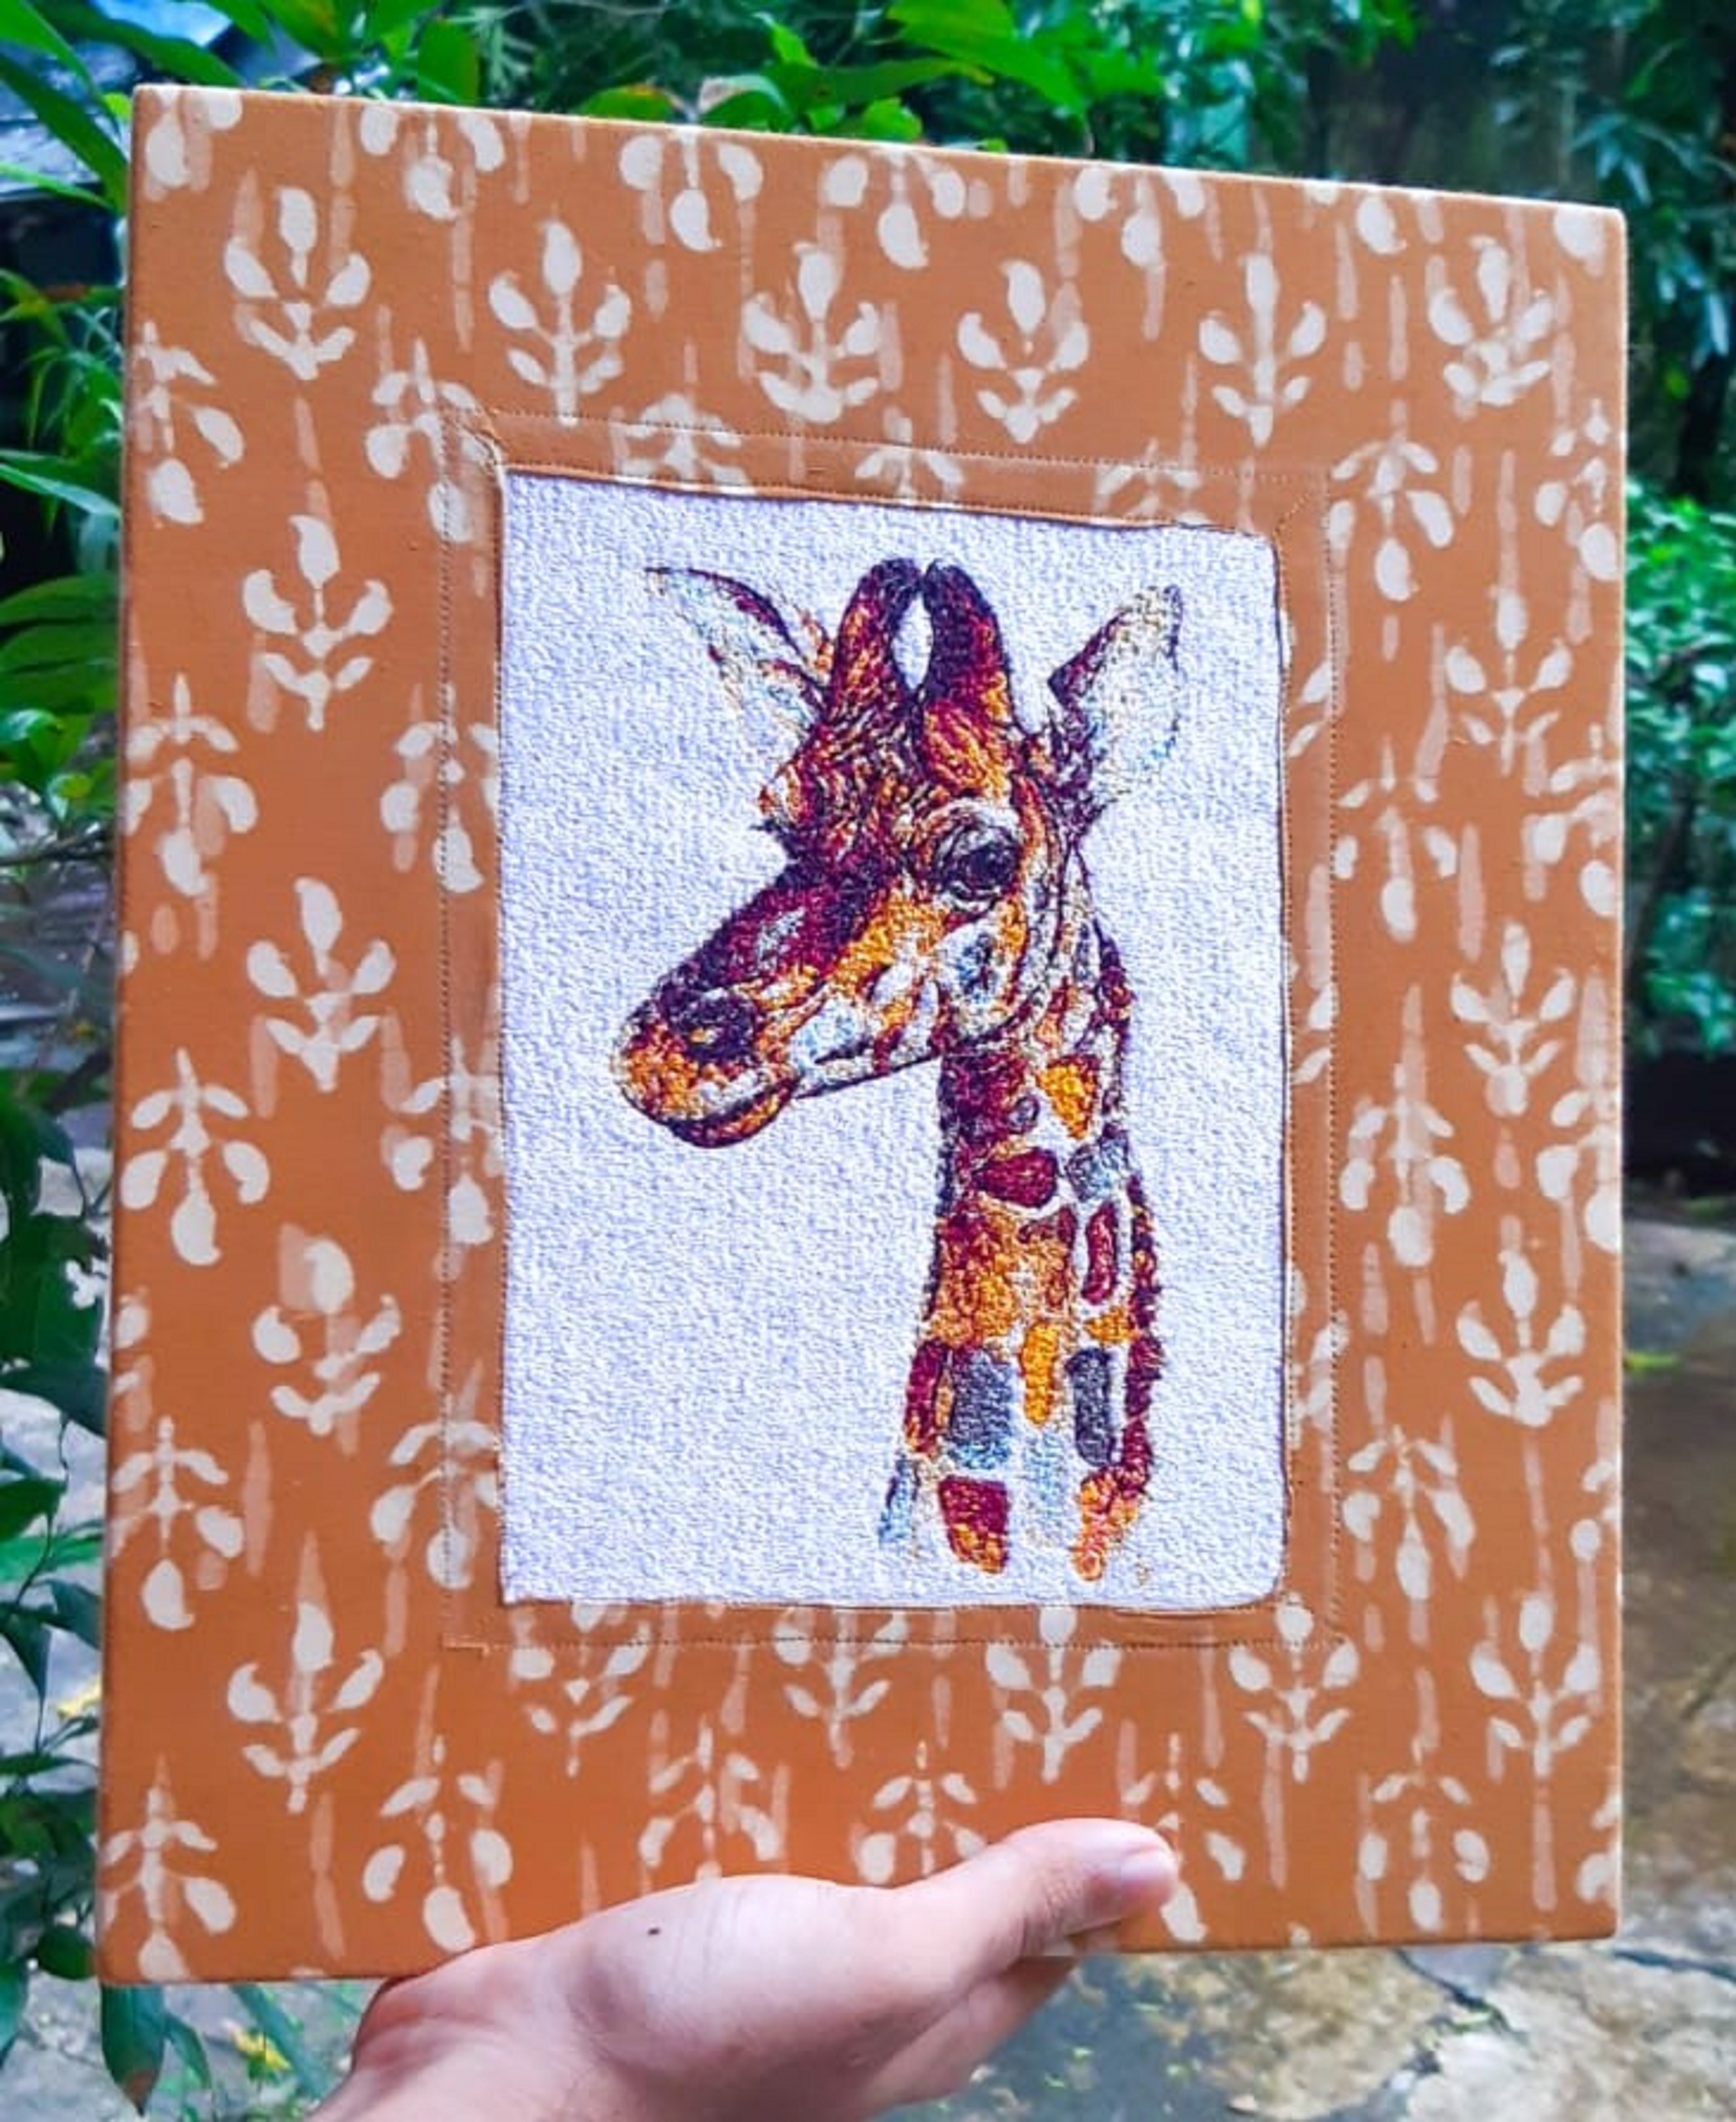 Embroidered, Giraffe head, portrait wall decor, ready to be hung animal wooden frame artwork, rustic decoration, Gift for wildlife lovers